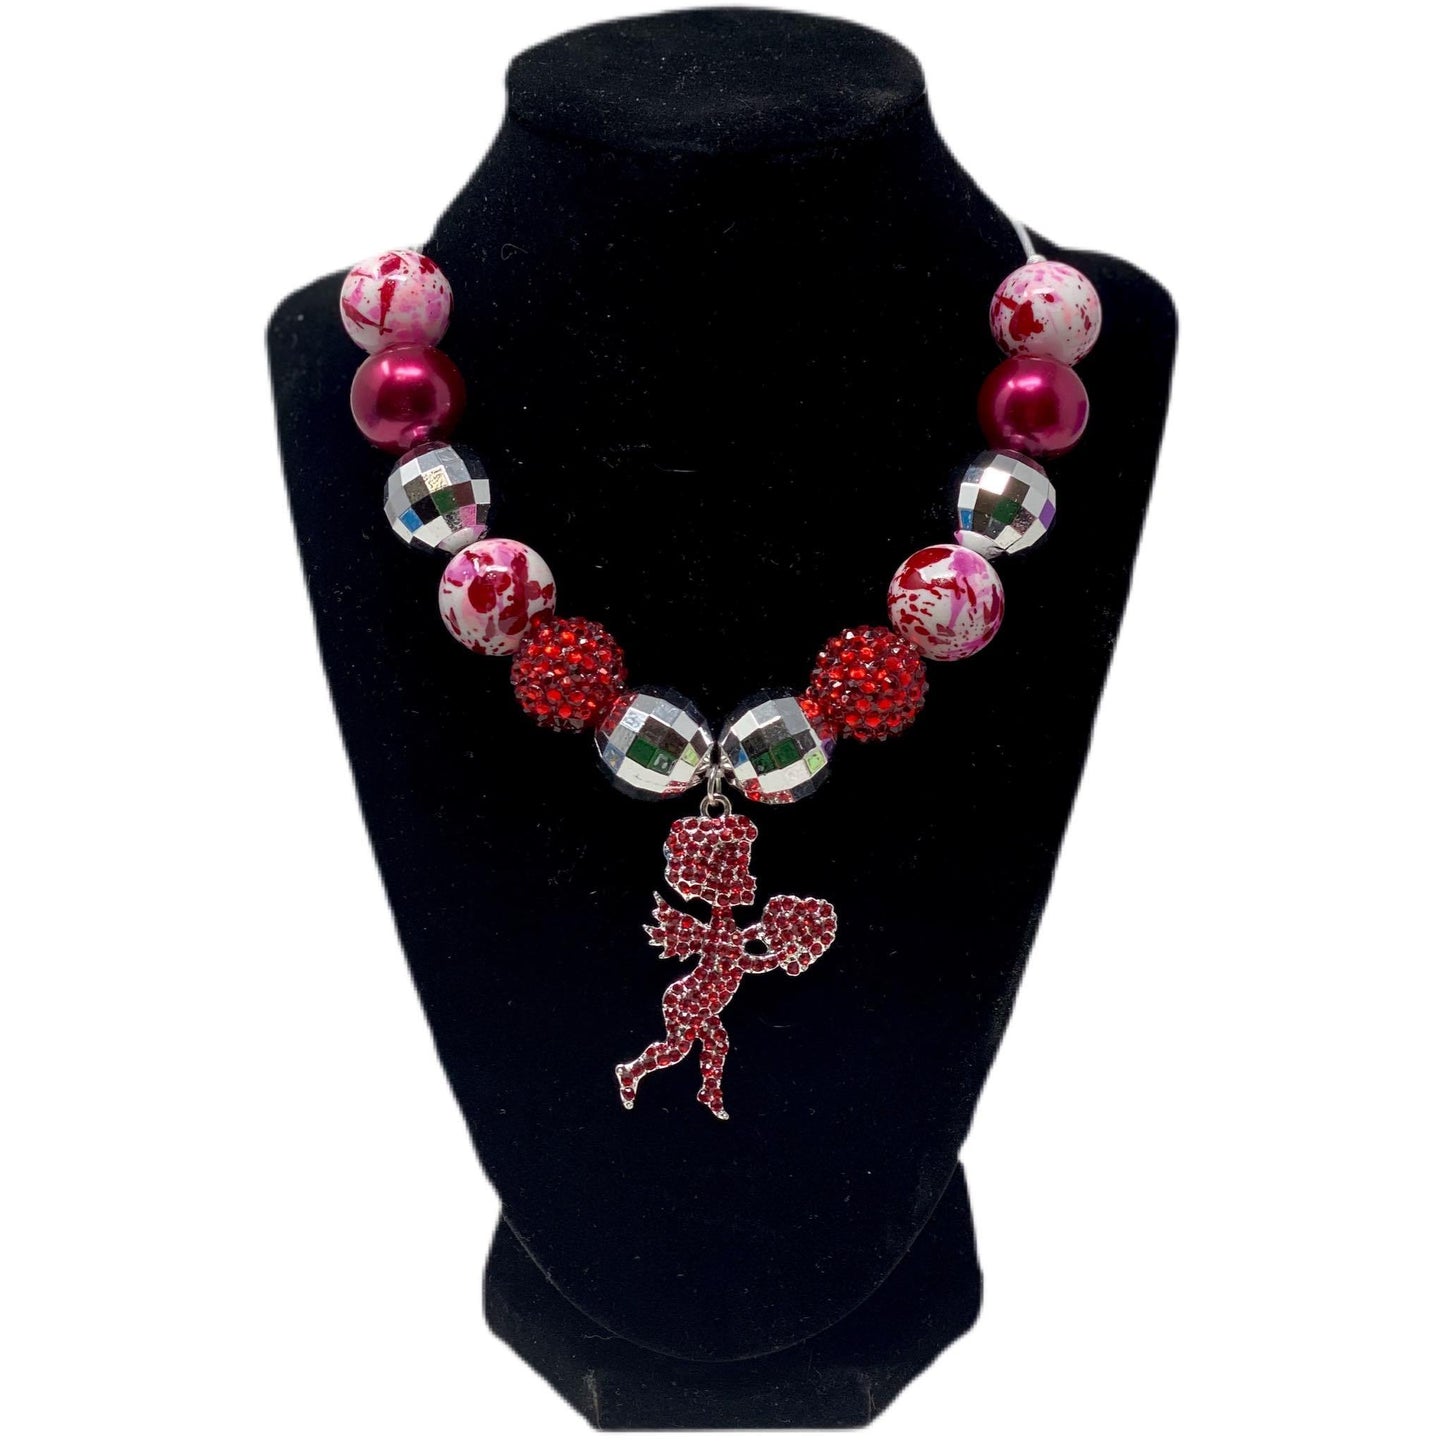 V-Day Bubblegum Necklace with Red Cupid Pendant